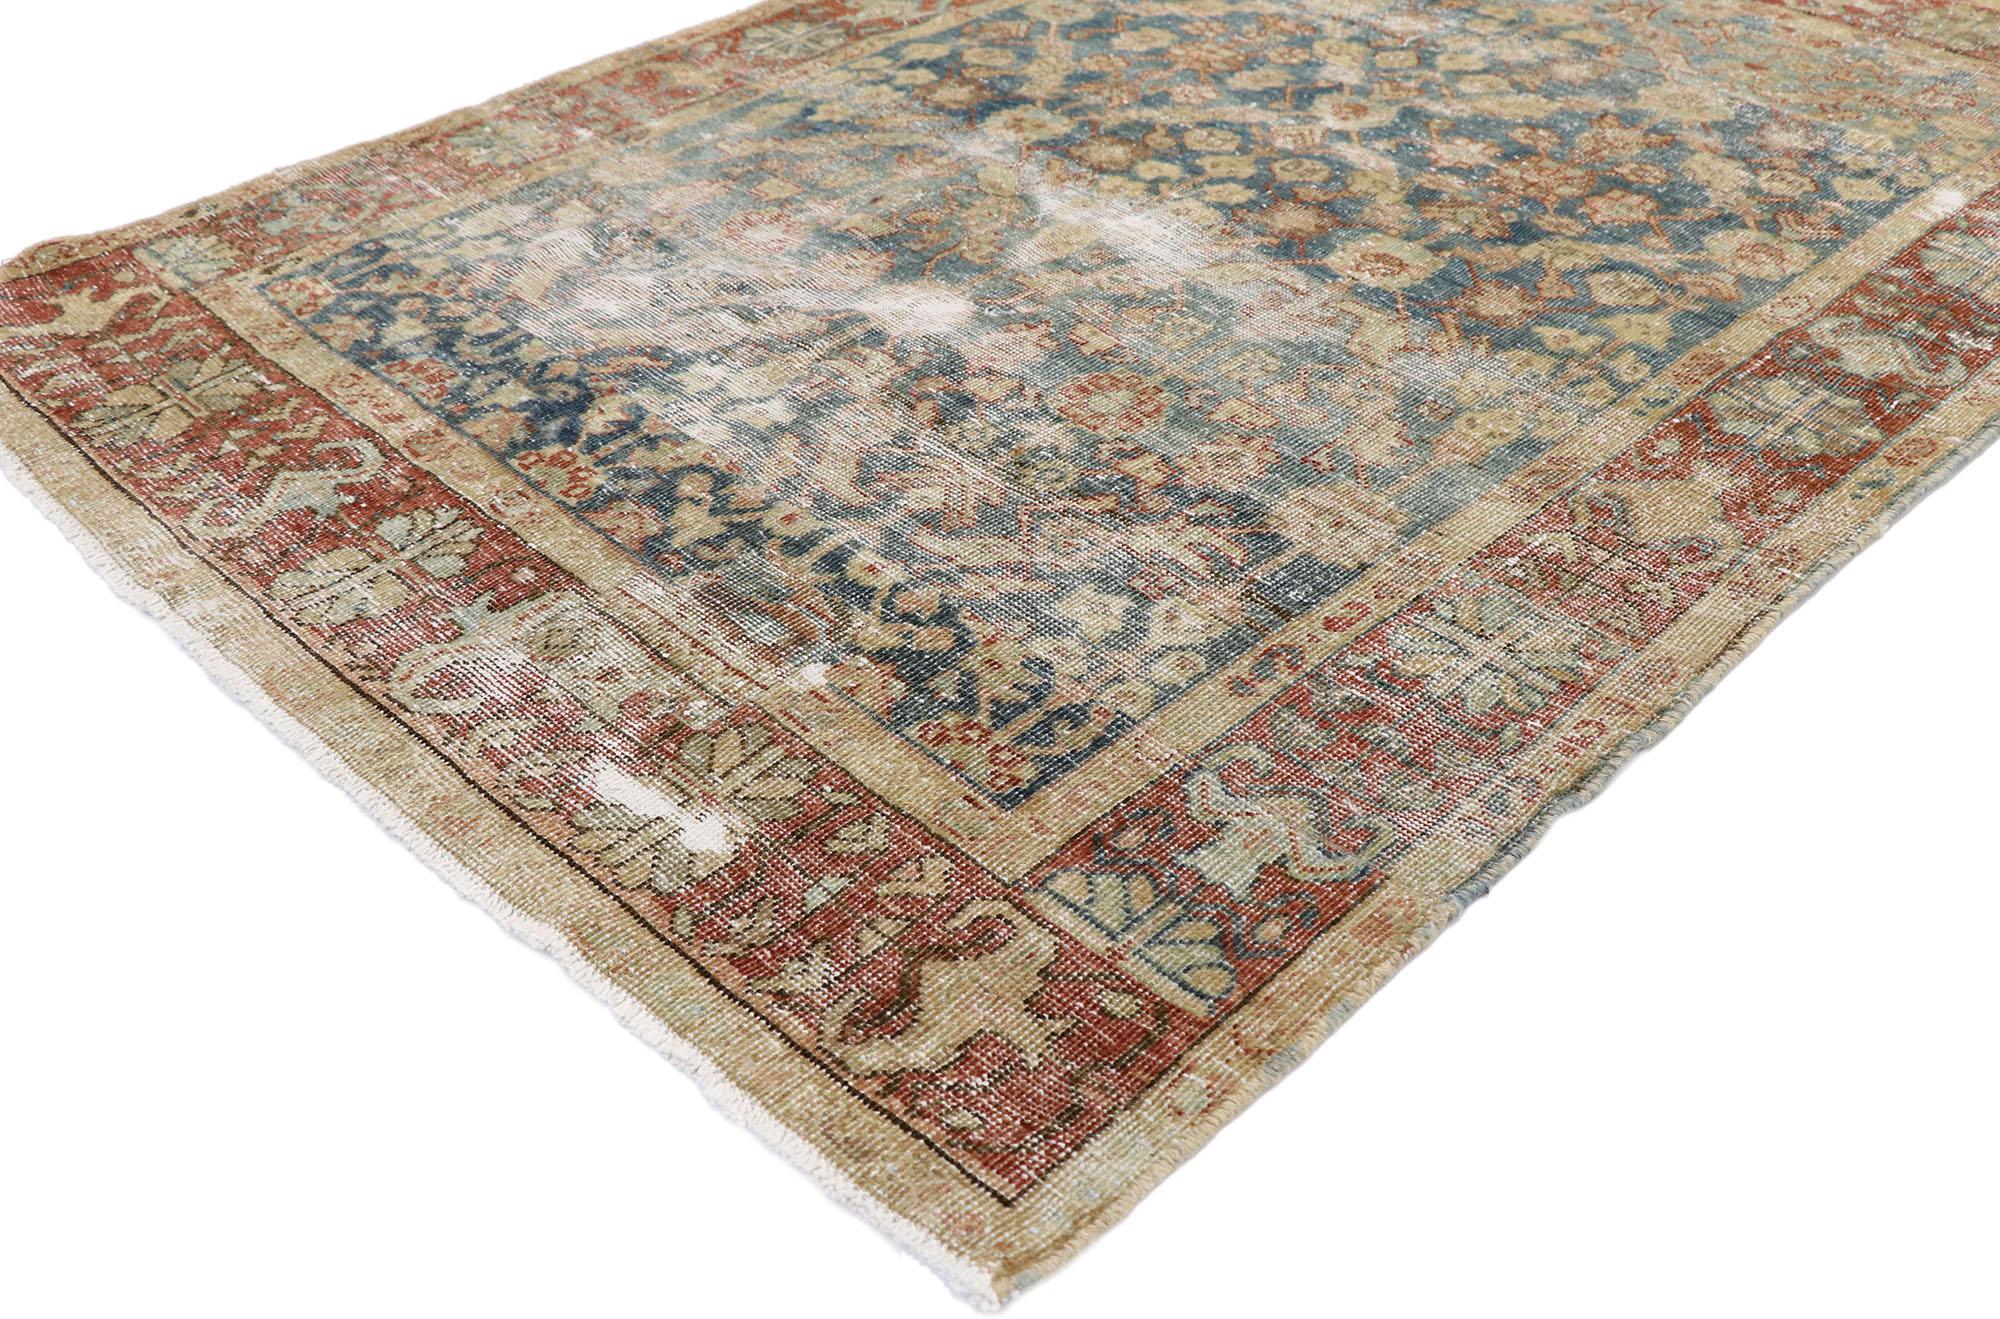 60850 Distressed Antique Persian Mahal rug with Rustic English style. Warm and inviting with a lovingly time-worn composition, this hand-knotted wool distressed antique Persian Mahal rug charms with ease. The weathered cerulean field features an